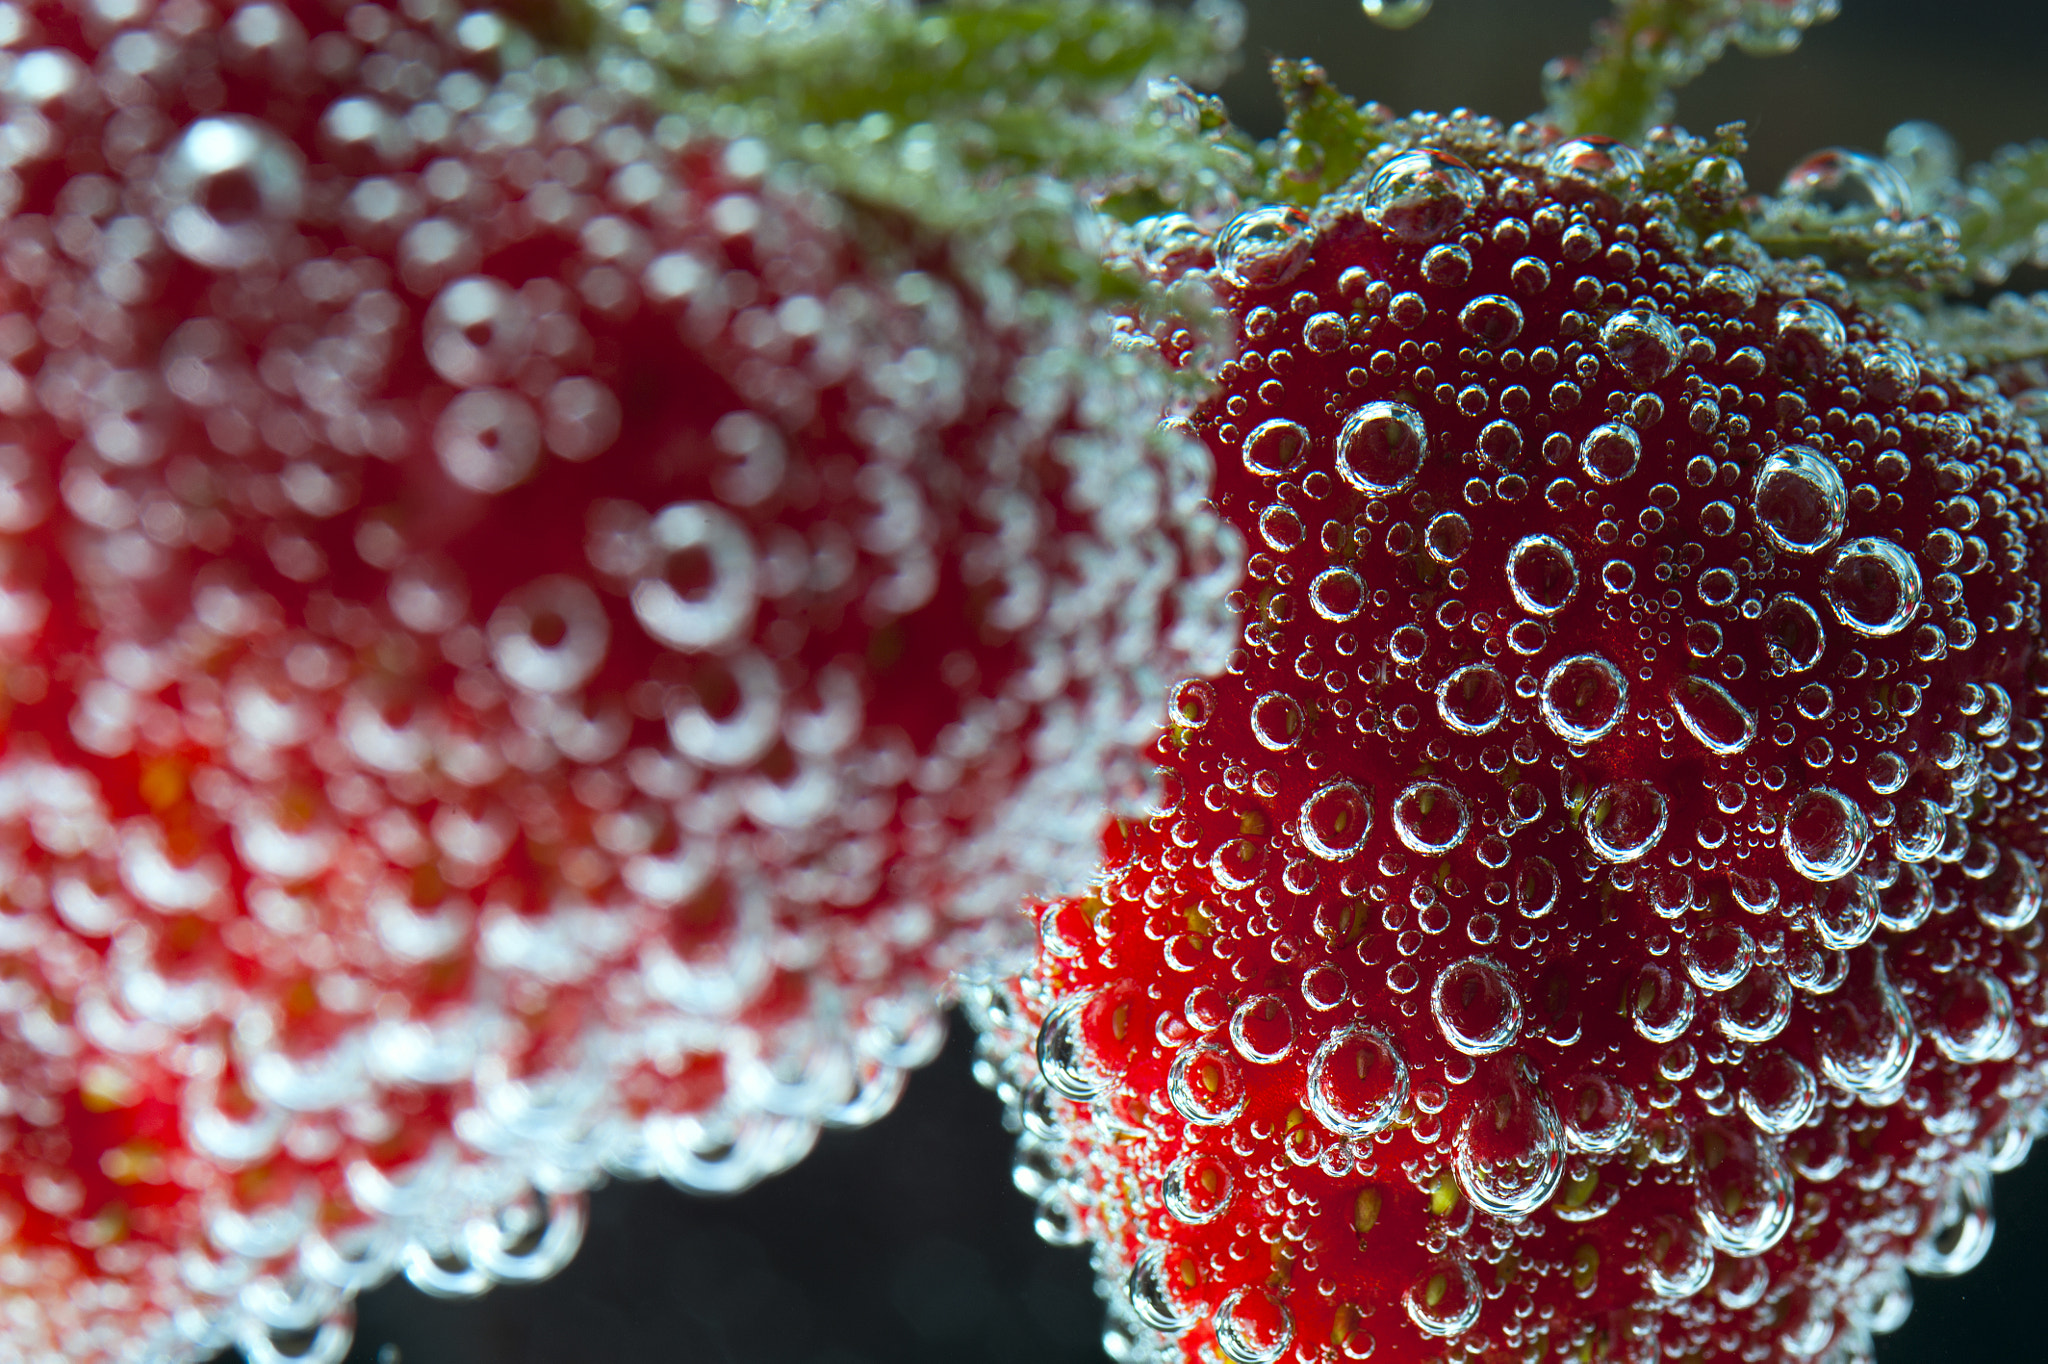 Nikon D700 + AF Micro-Nikkor 105mm f/2.8 sample photo. Strawberries in water with bubbles, closeup photography